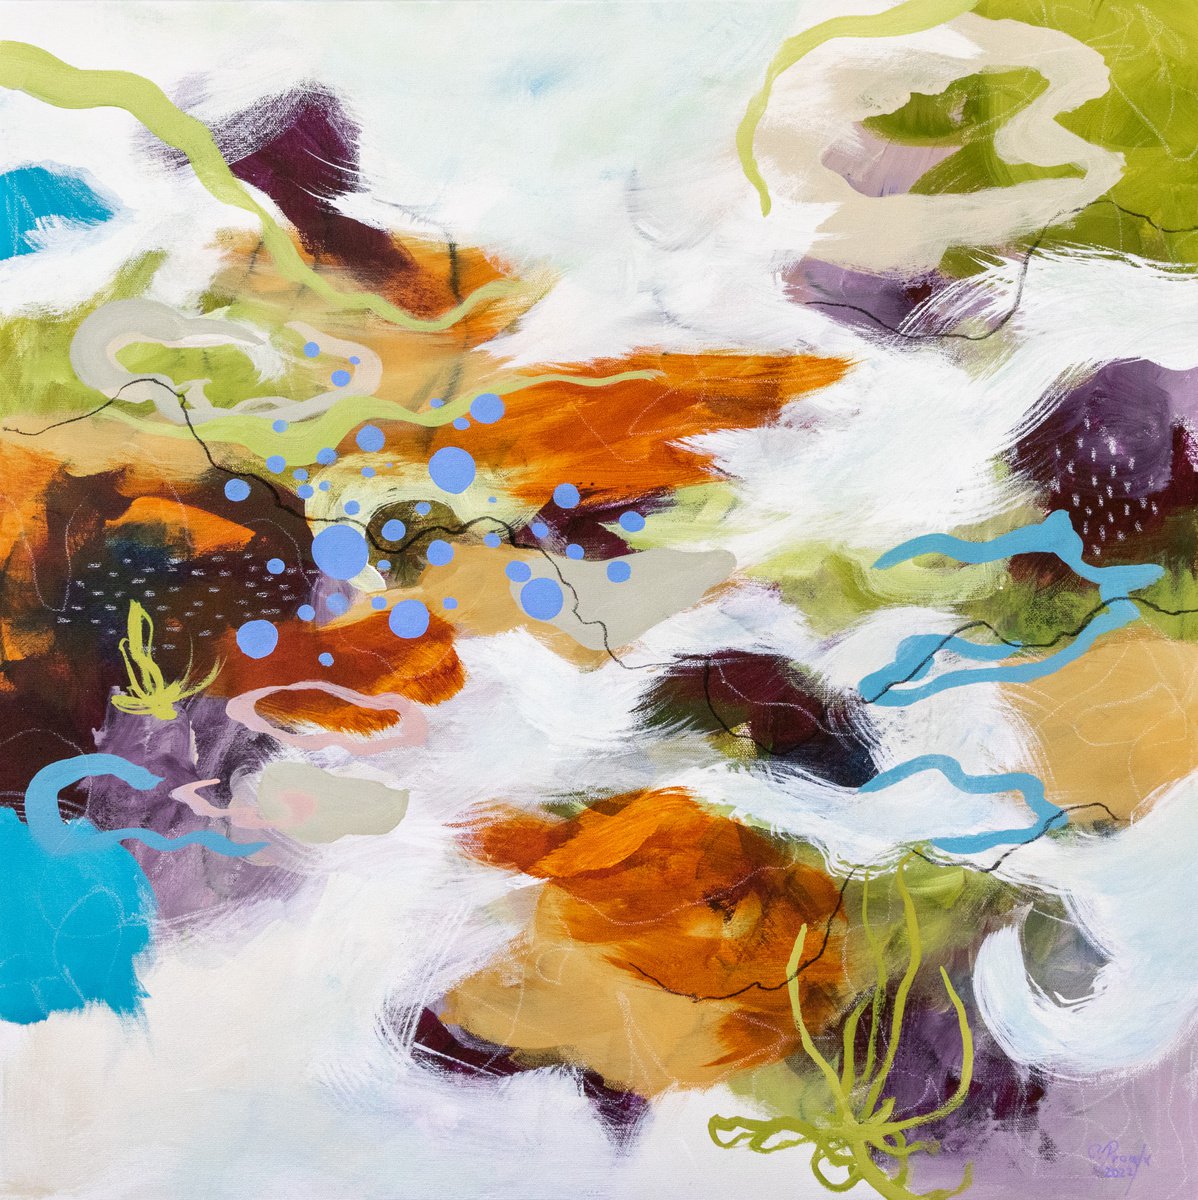 Eau limpide - Abstract landscape - Ready to hang by Chantal Proulx